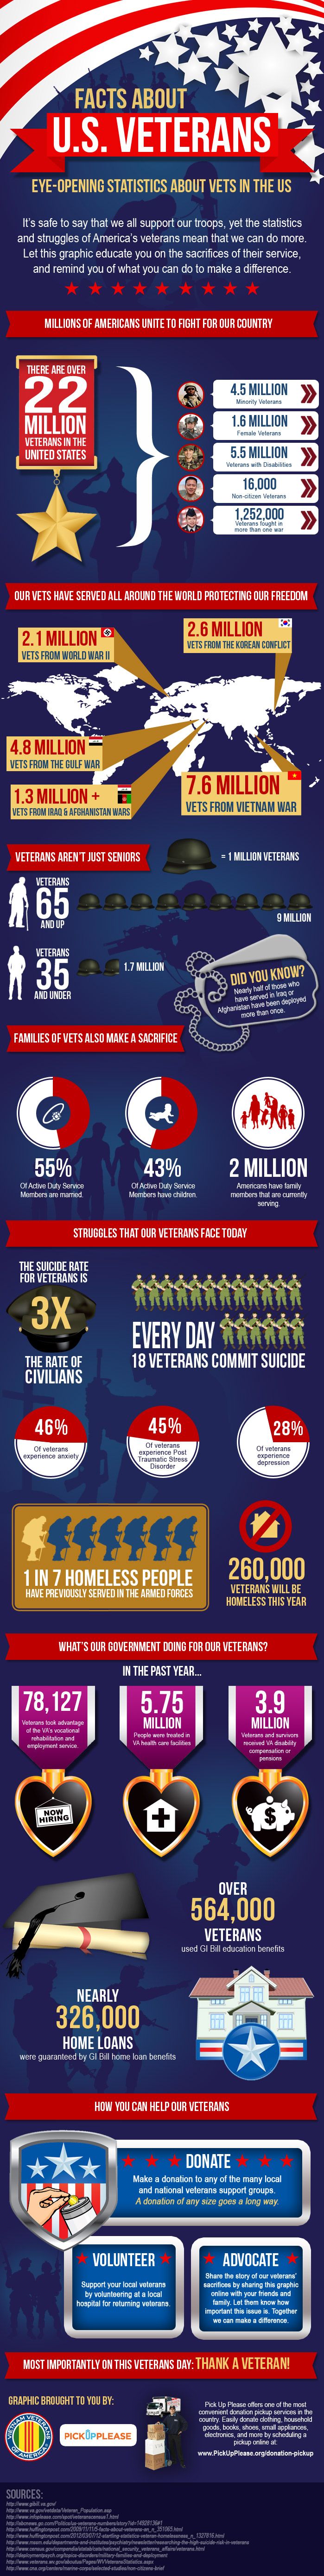 Facts About U.S. Veterans